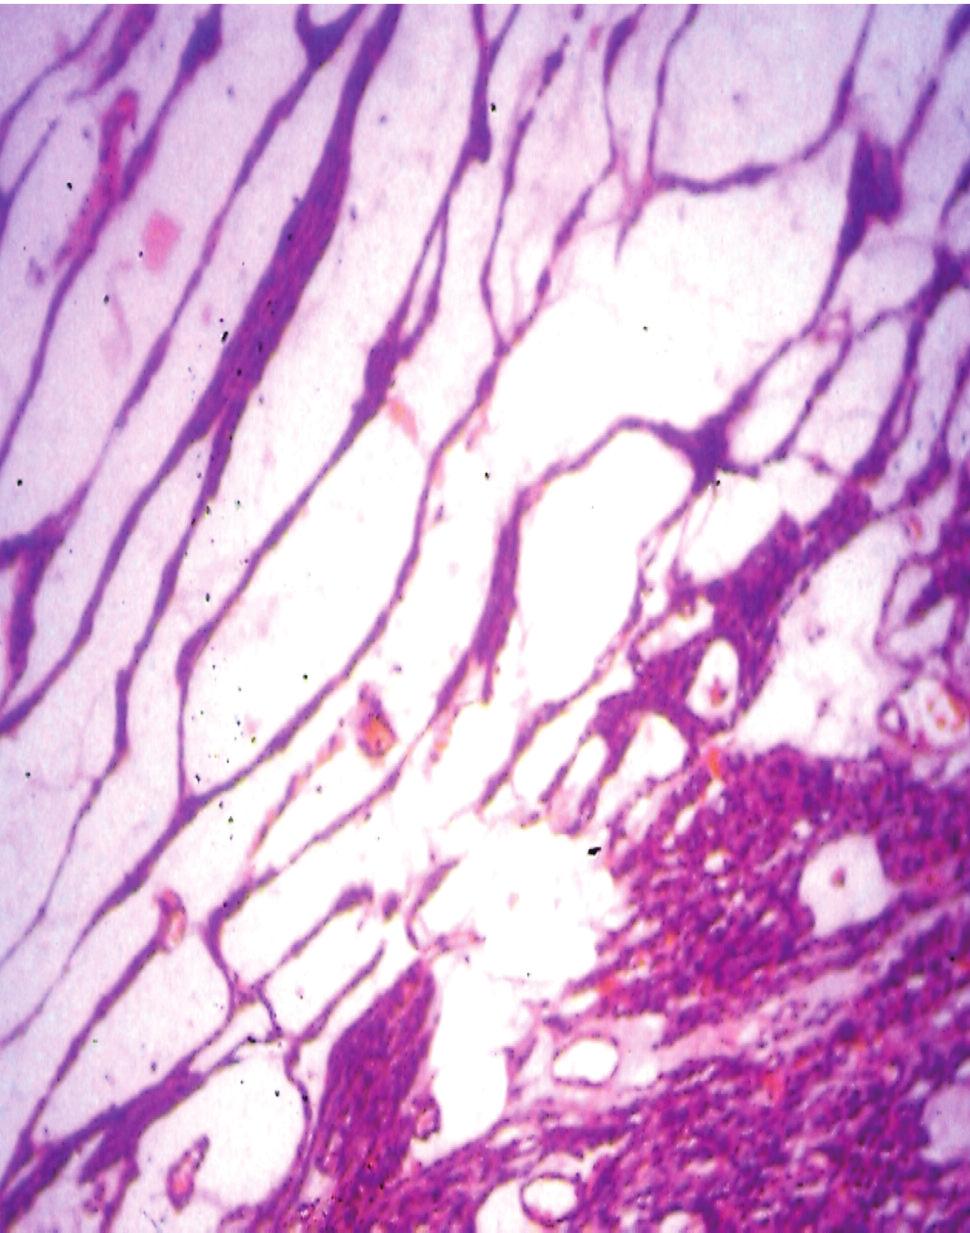 Kanapilly Francis Magdalene et al. The gross specimen received in the histopathology lab showed an enlarged thyroid that weighed 80g. One lobe was enlarged and measured 6 4 cm.